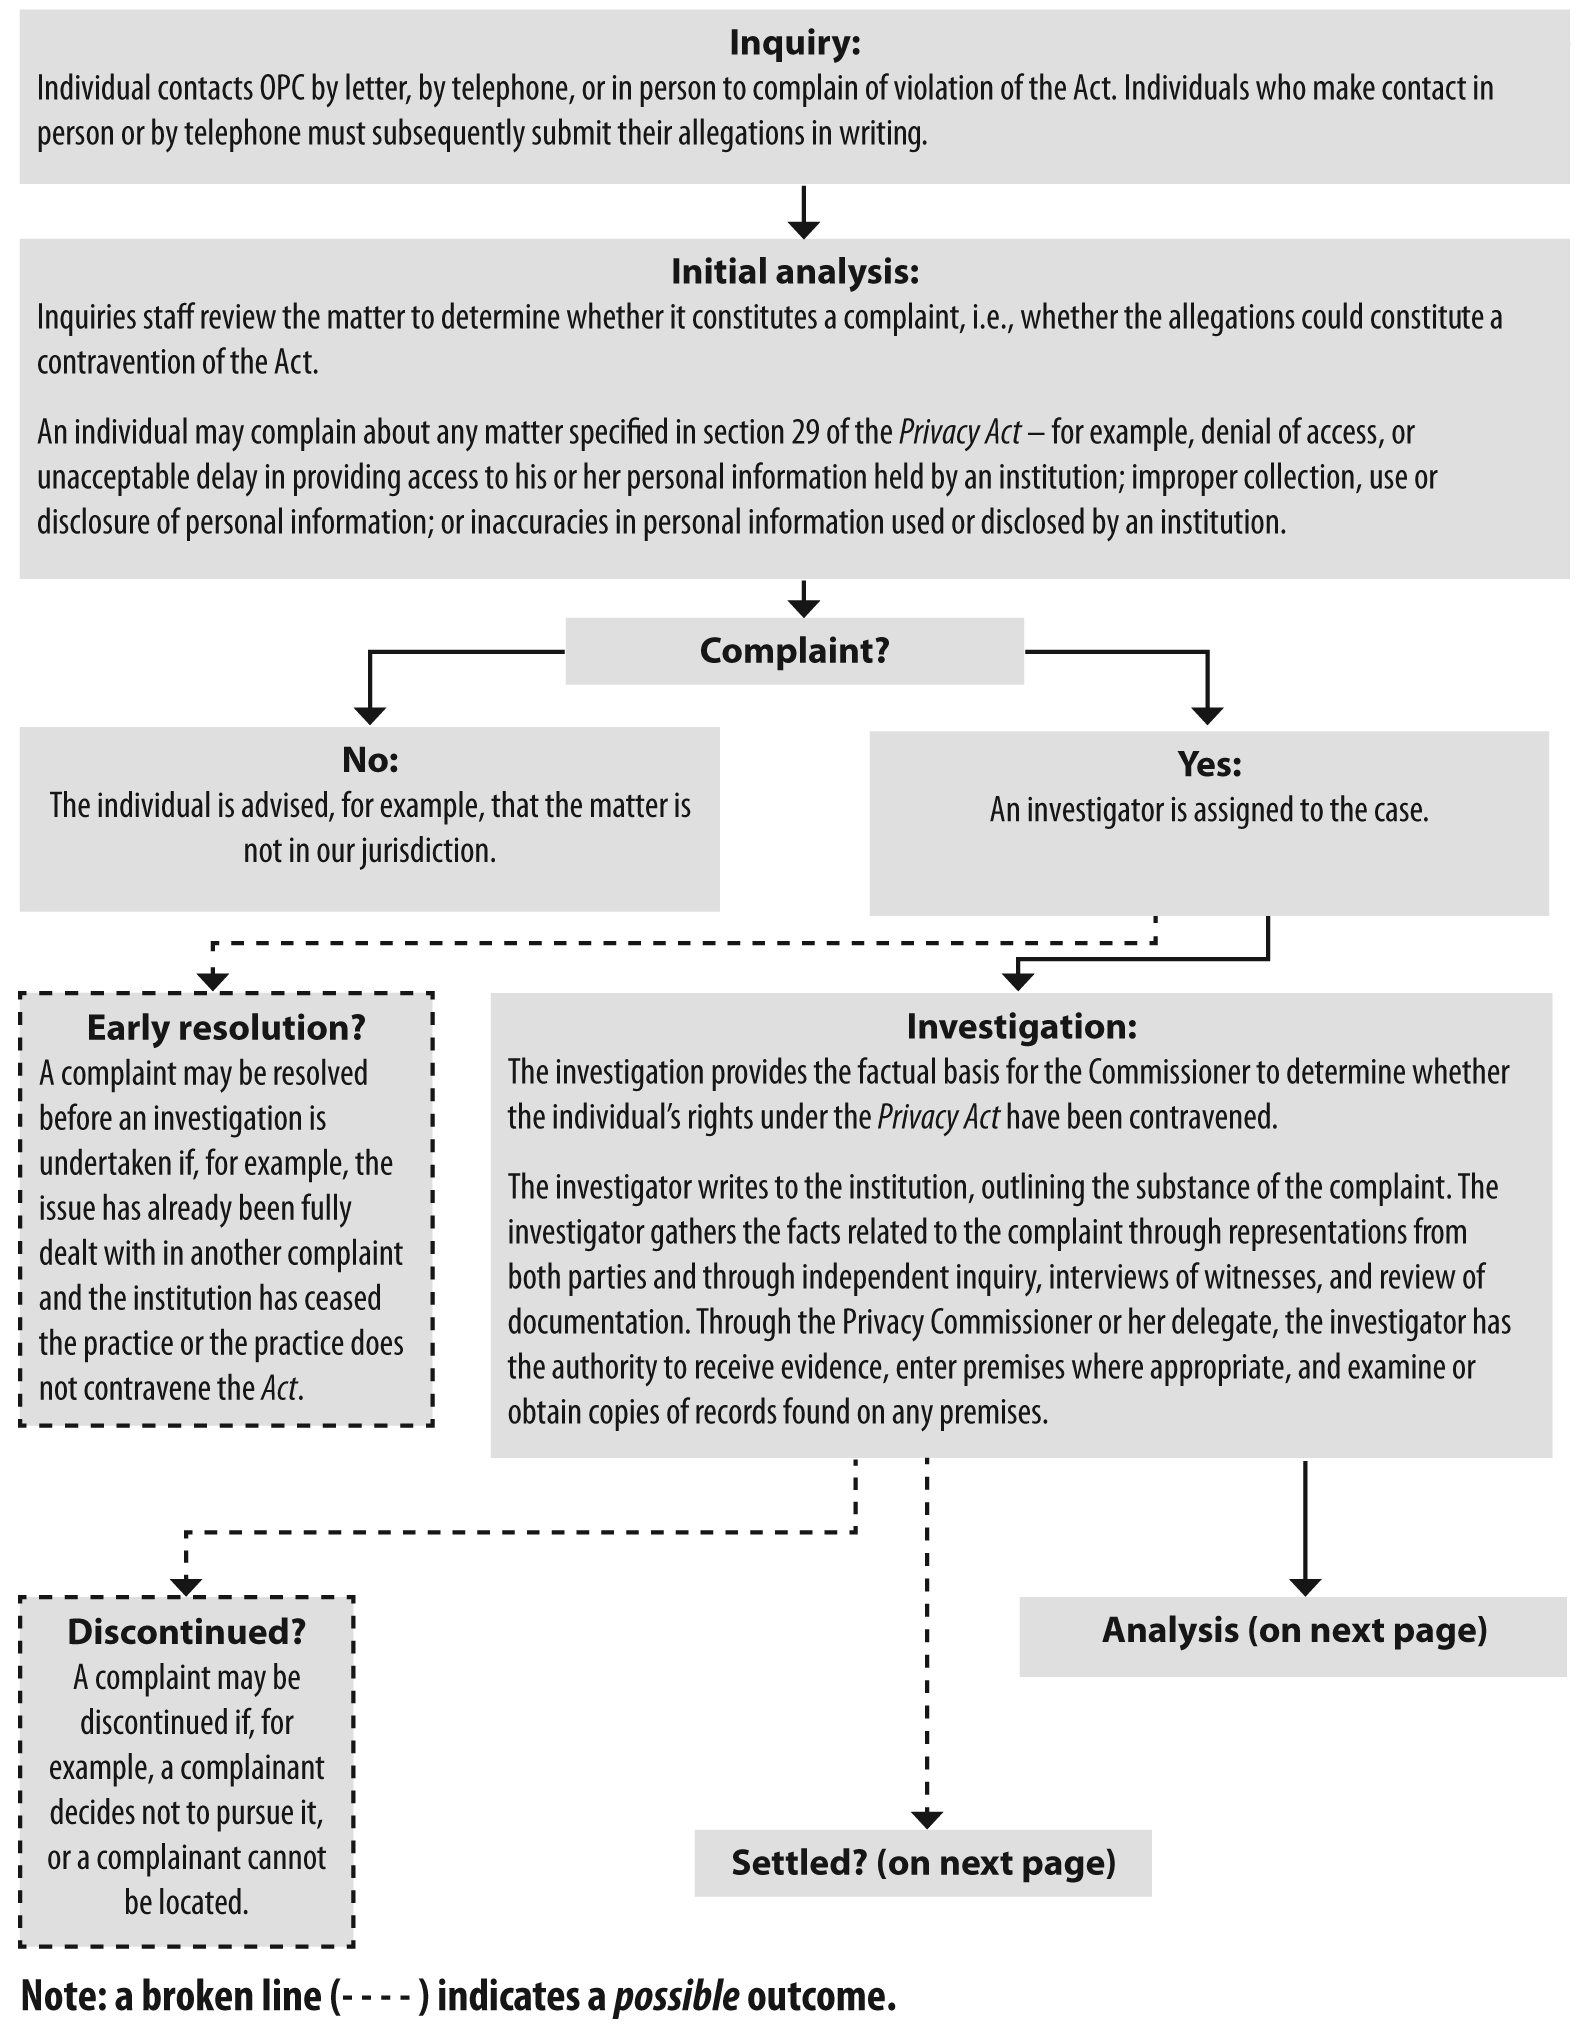 Investigation Process under the Privacy Act (flow chart)